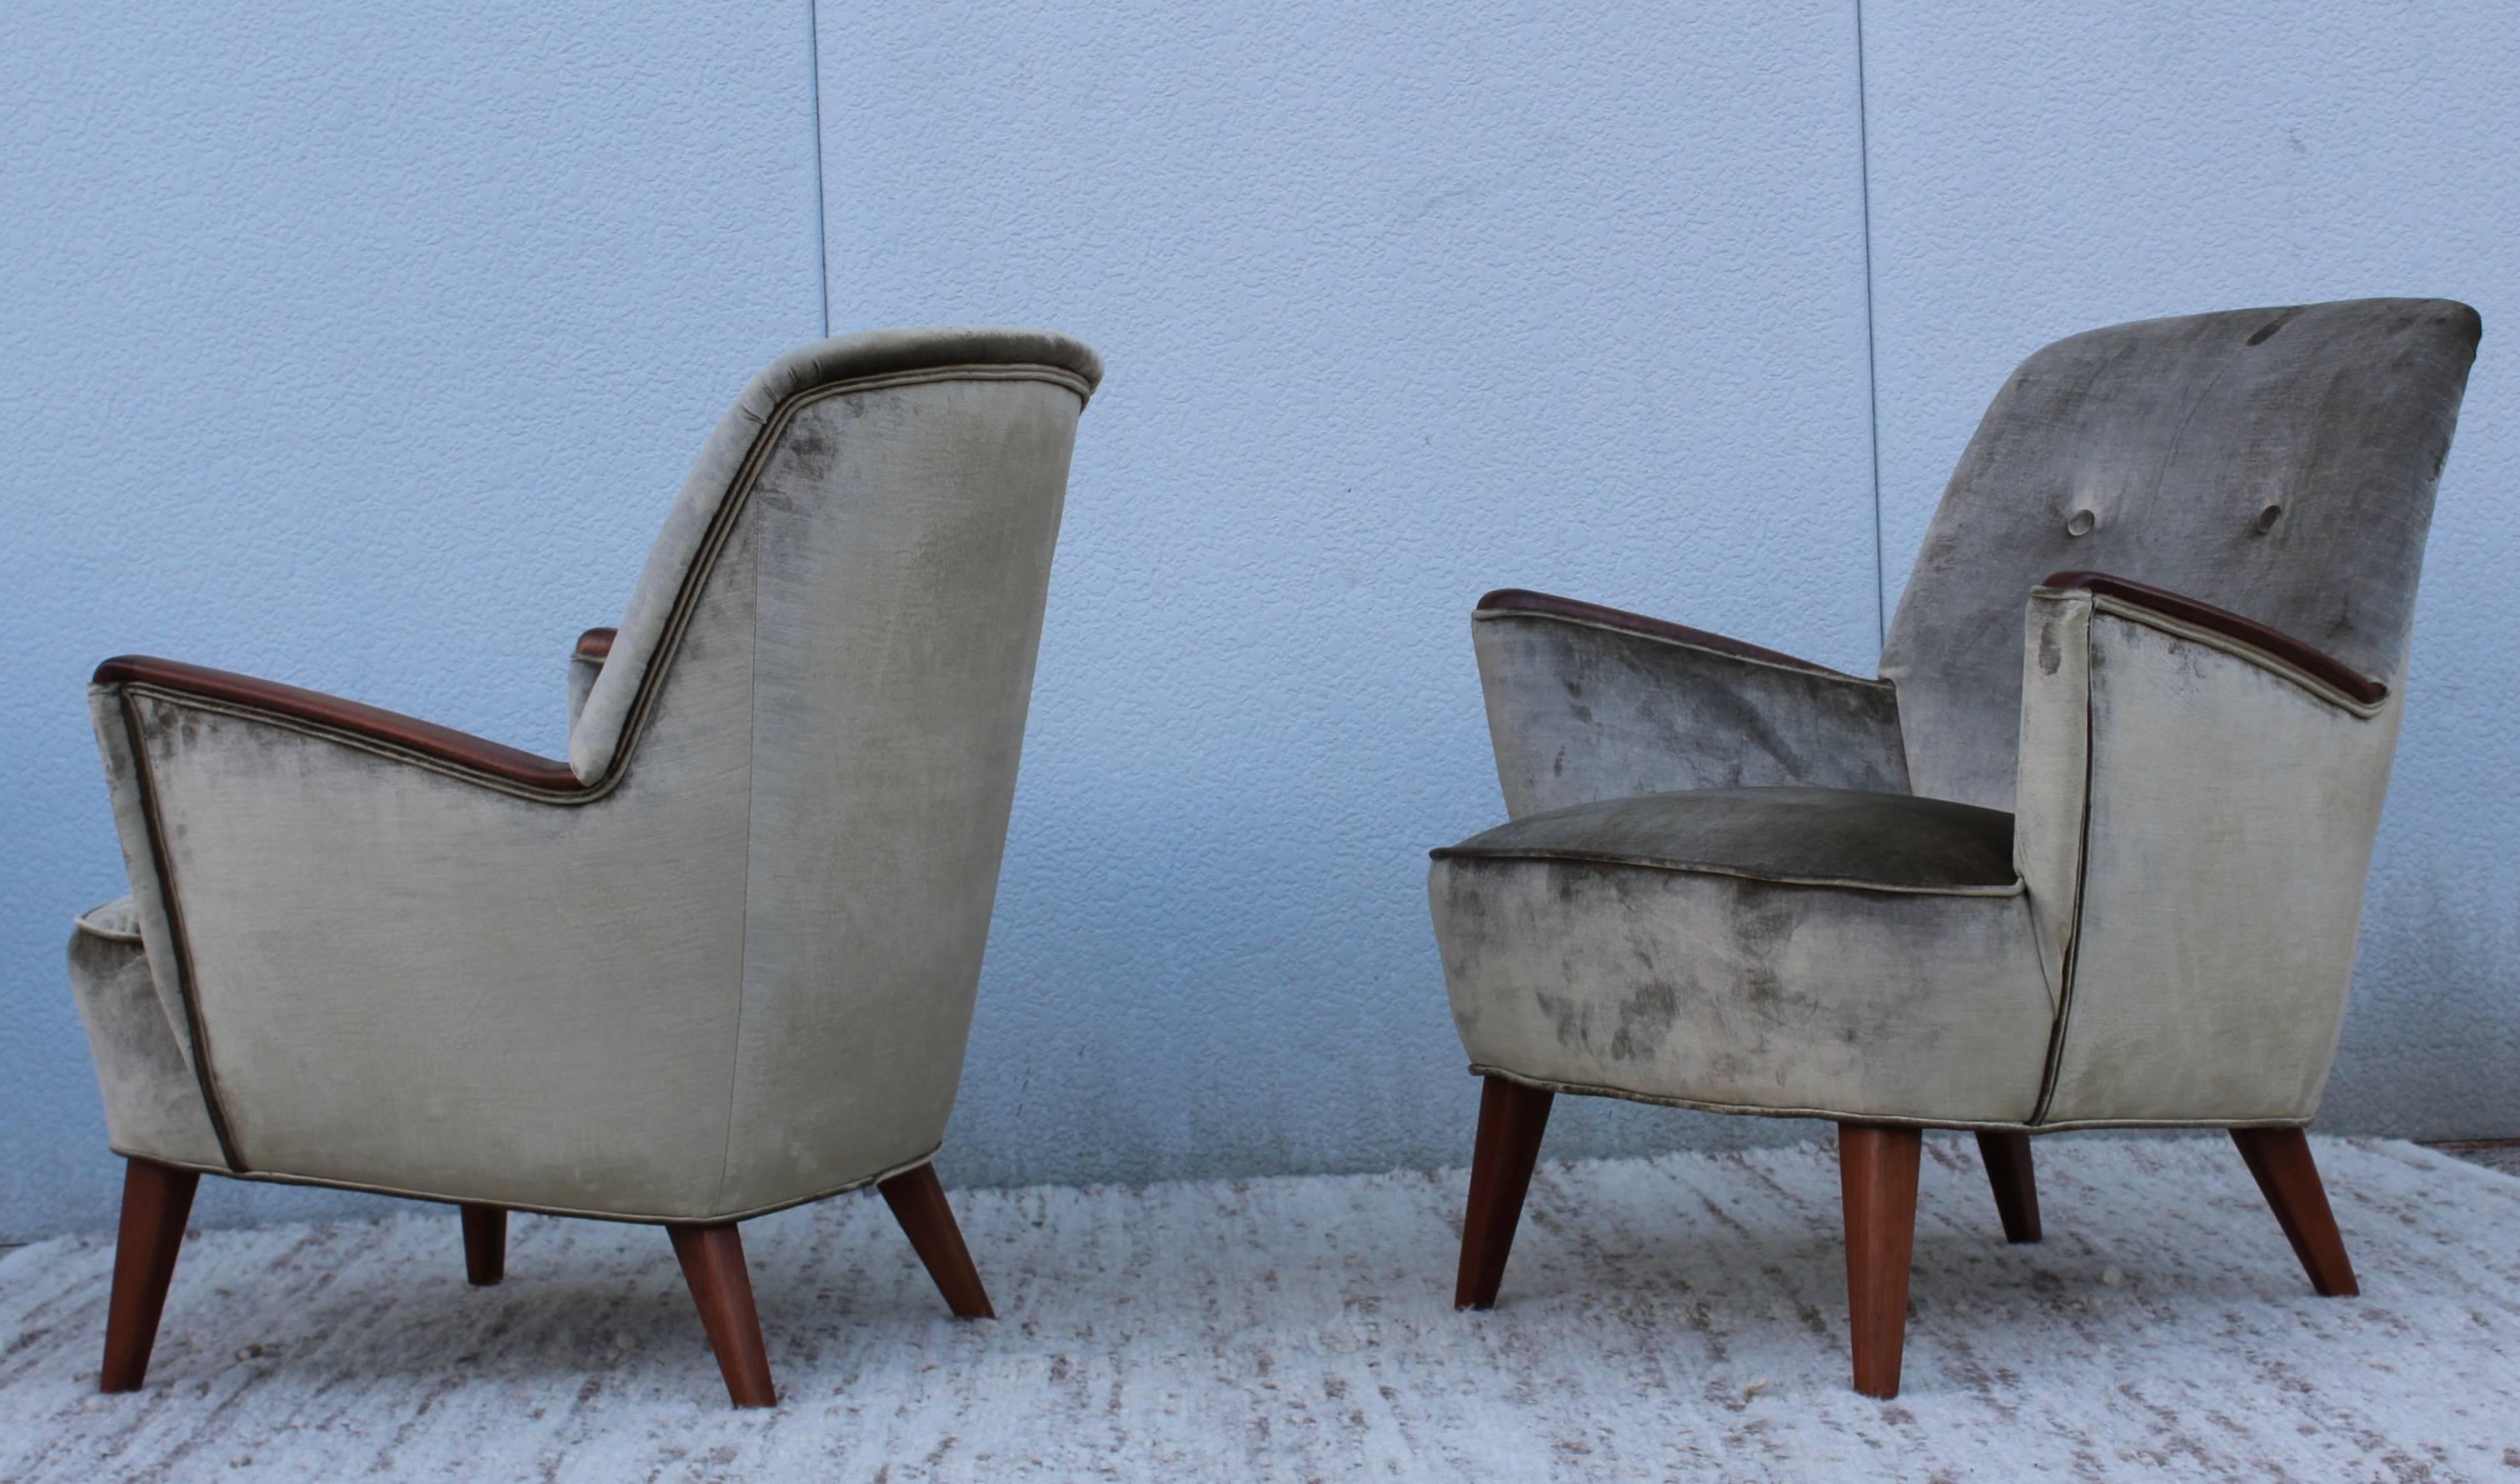 1960s modern Italian lounge chairs with walnut legs and arms. Newly upholstered in velvet.